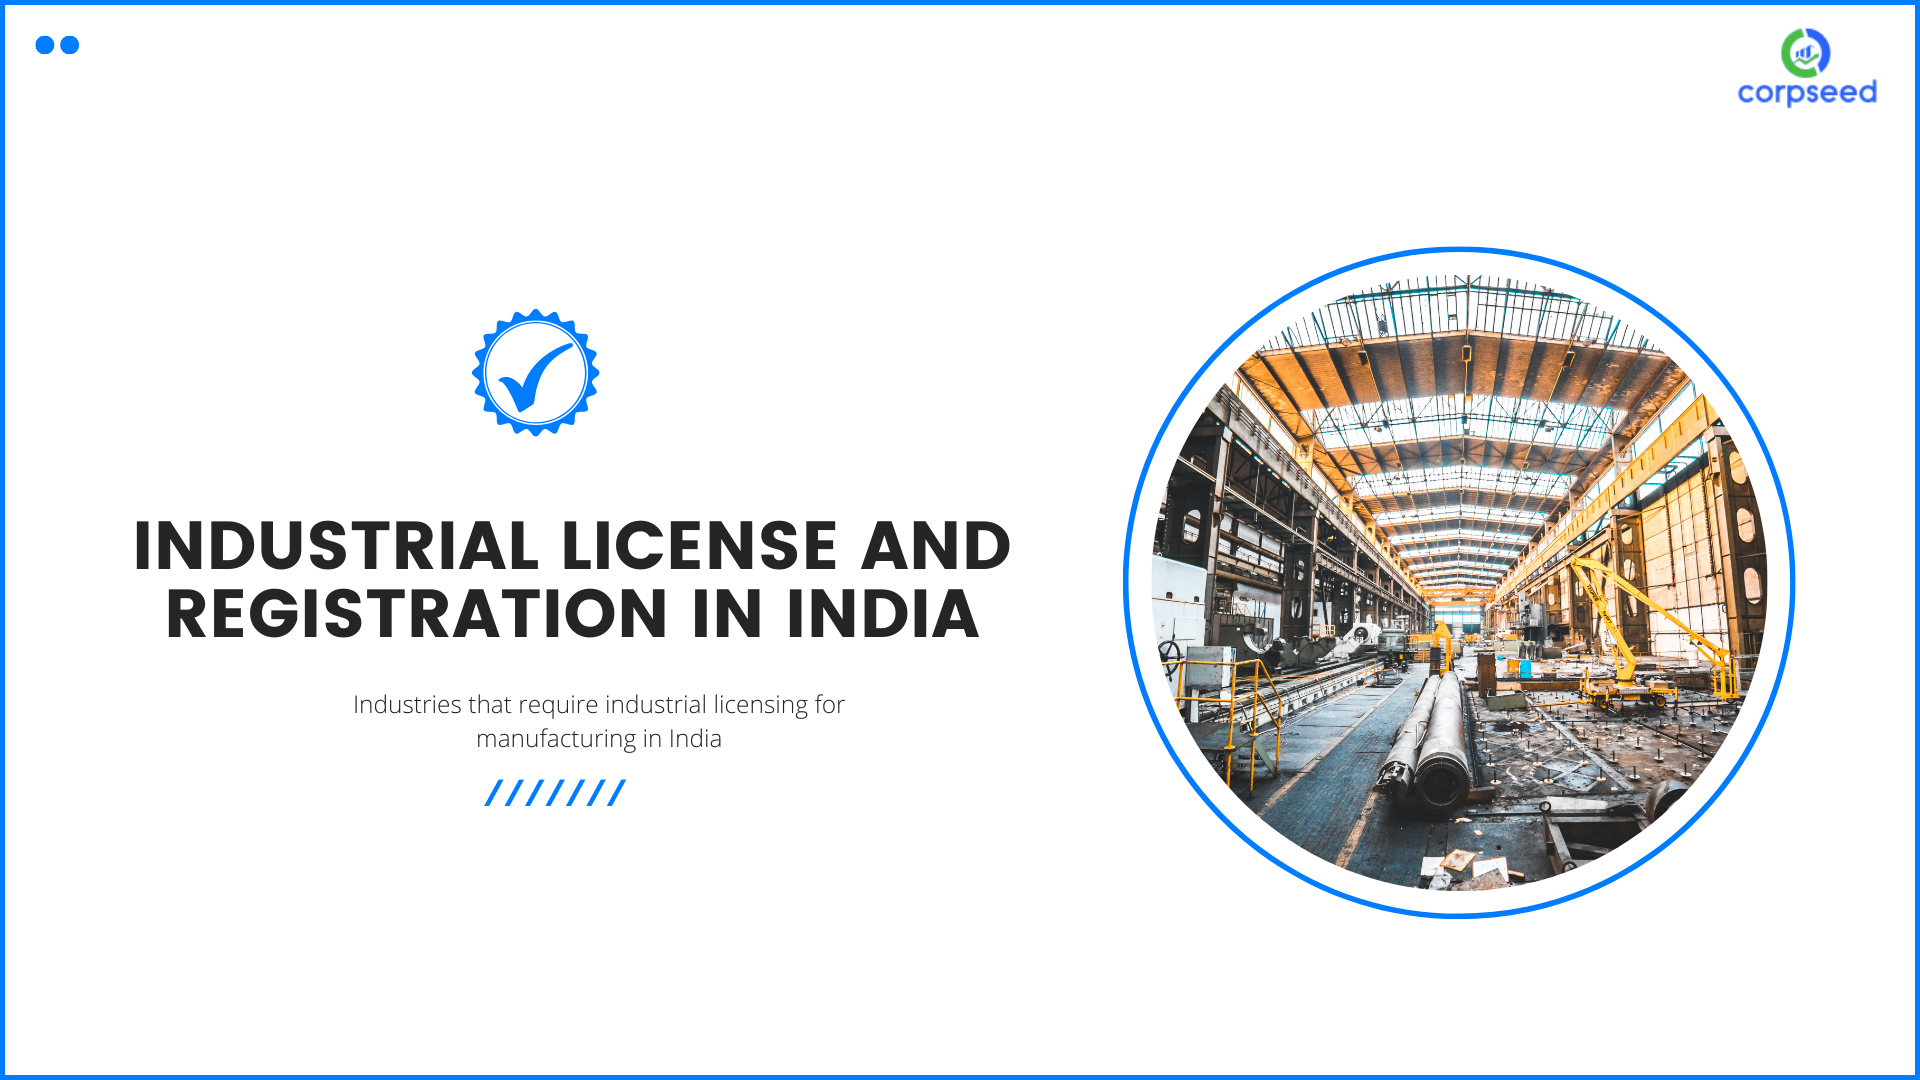 industrial-license-and-registration-process-in-india-under-dpiit-corpseed.png